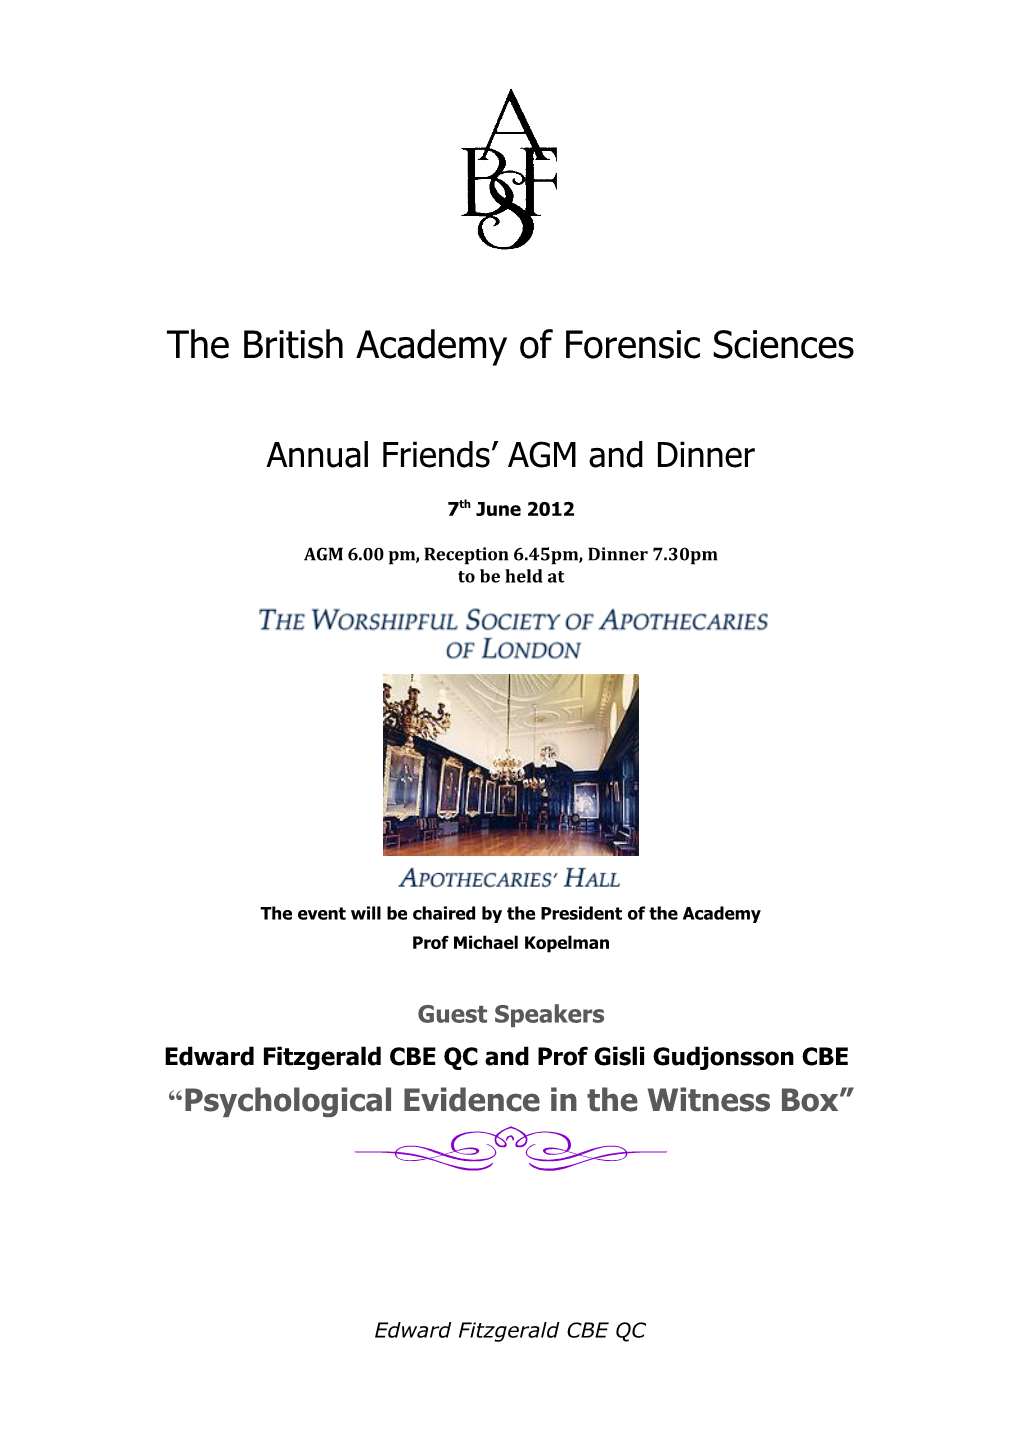 The BRITISH ACADEMY of FORENSIC SCIENCES